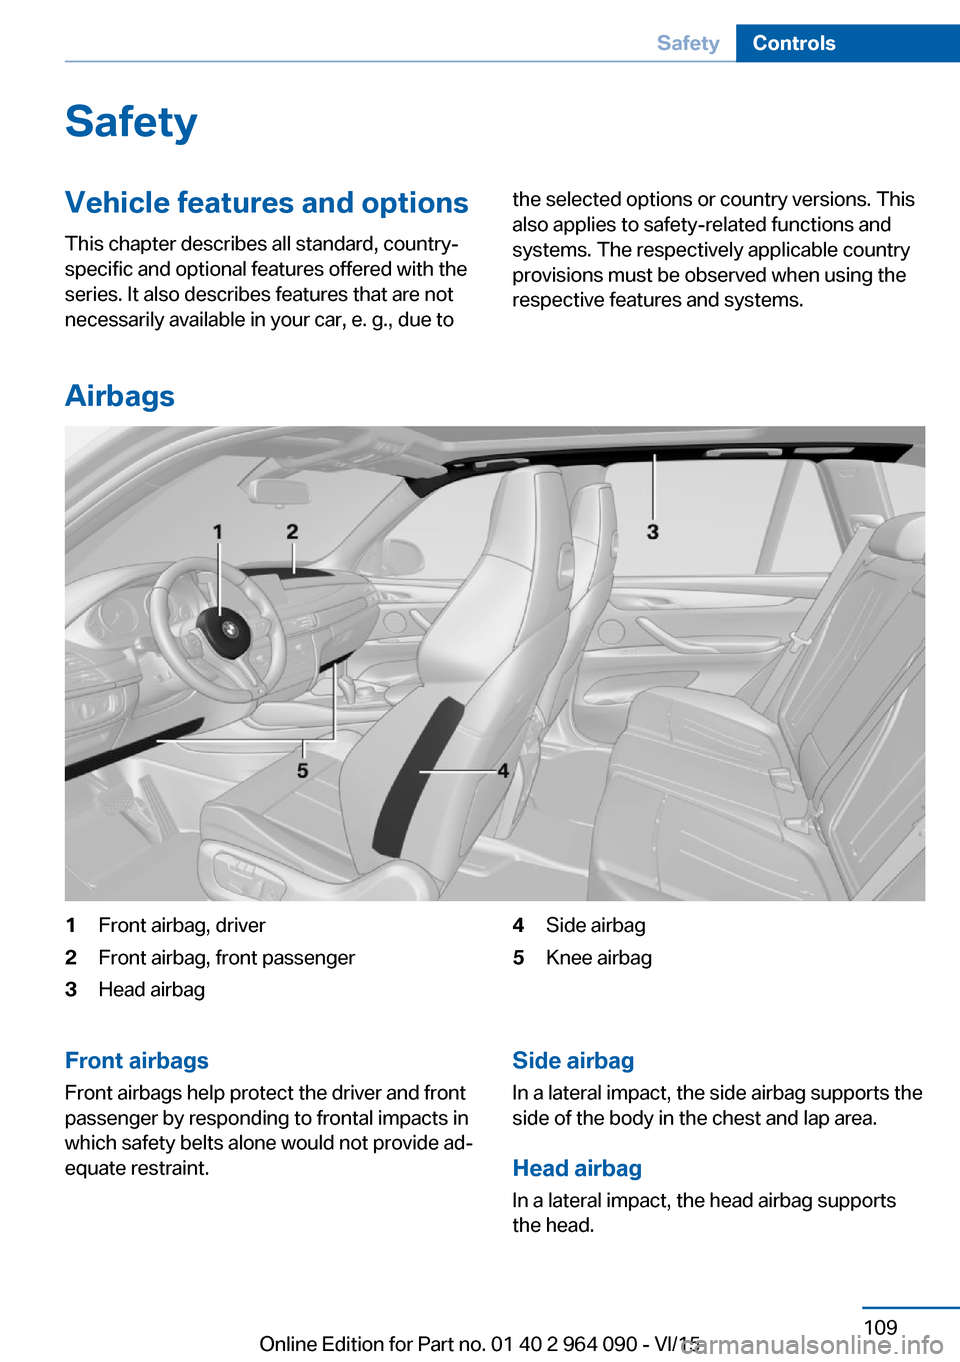 BMW X6M 2016 F86 Owners Manual SafetyVehicle features and options
This chapter describes all standard, country-
specific and optional features offered with the
series. It also describes features that are not
necessarily available i